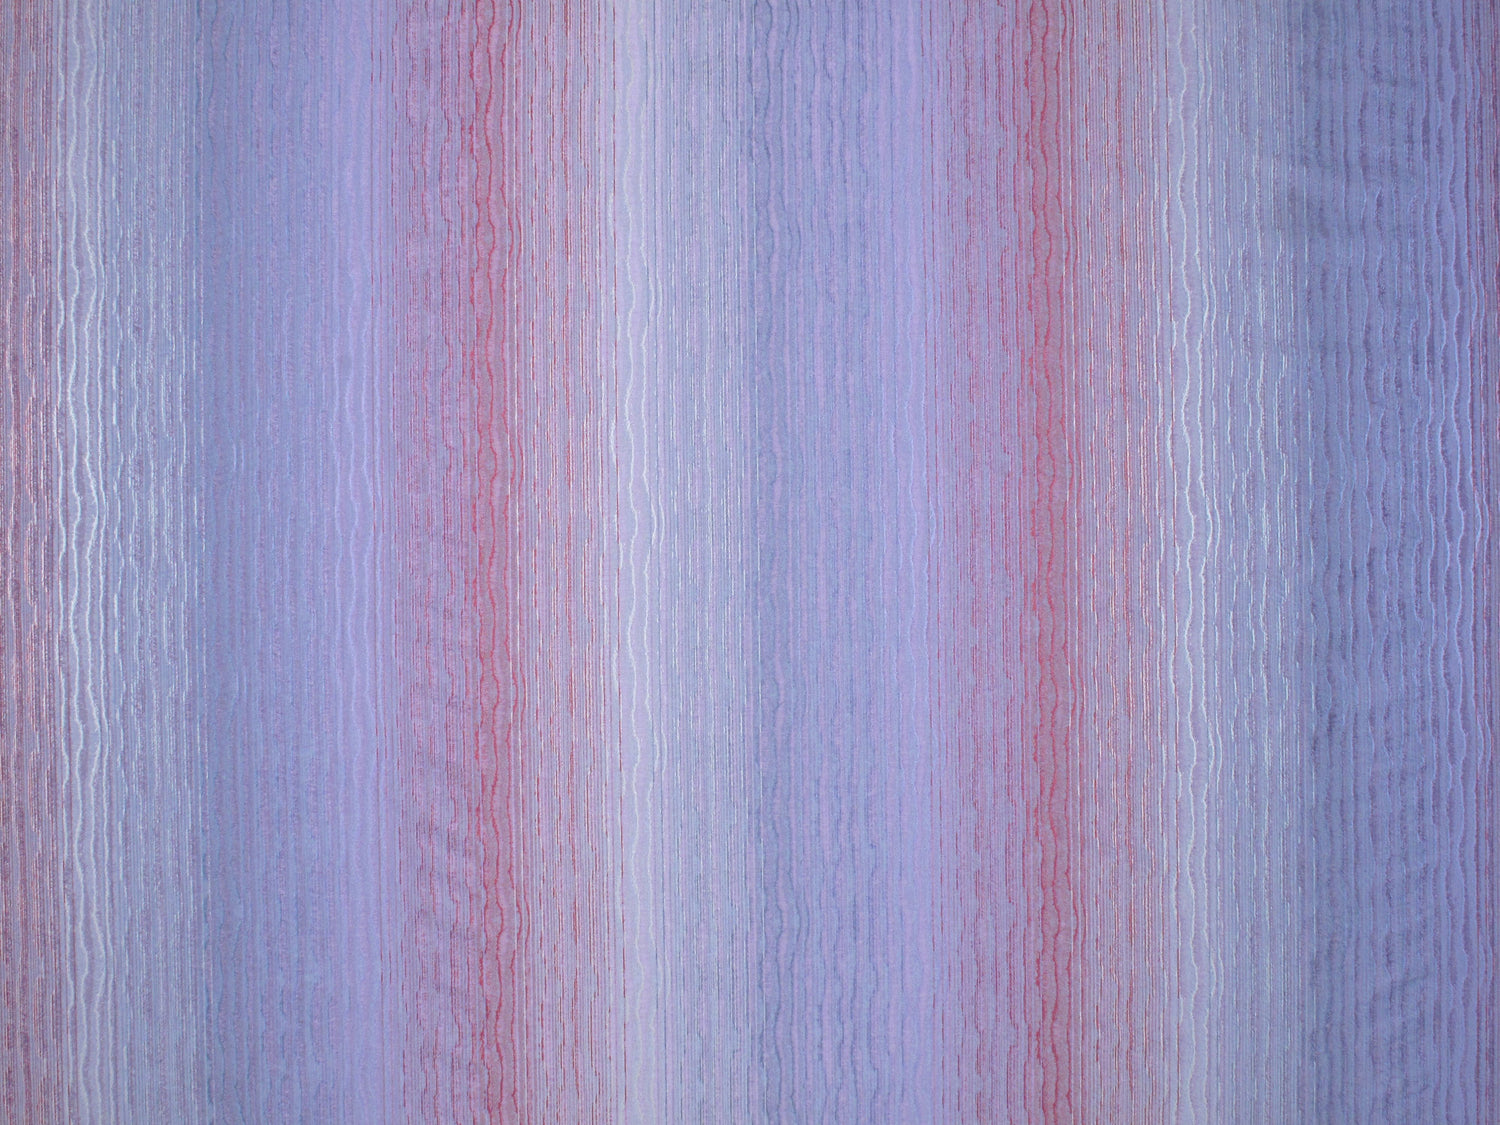 Chamarel Falls fabric in lilac color - pattern number M1 00038005 - by Scalamandre in the Old World Weavers collection